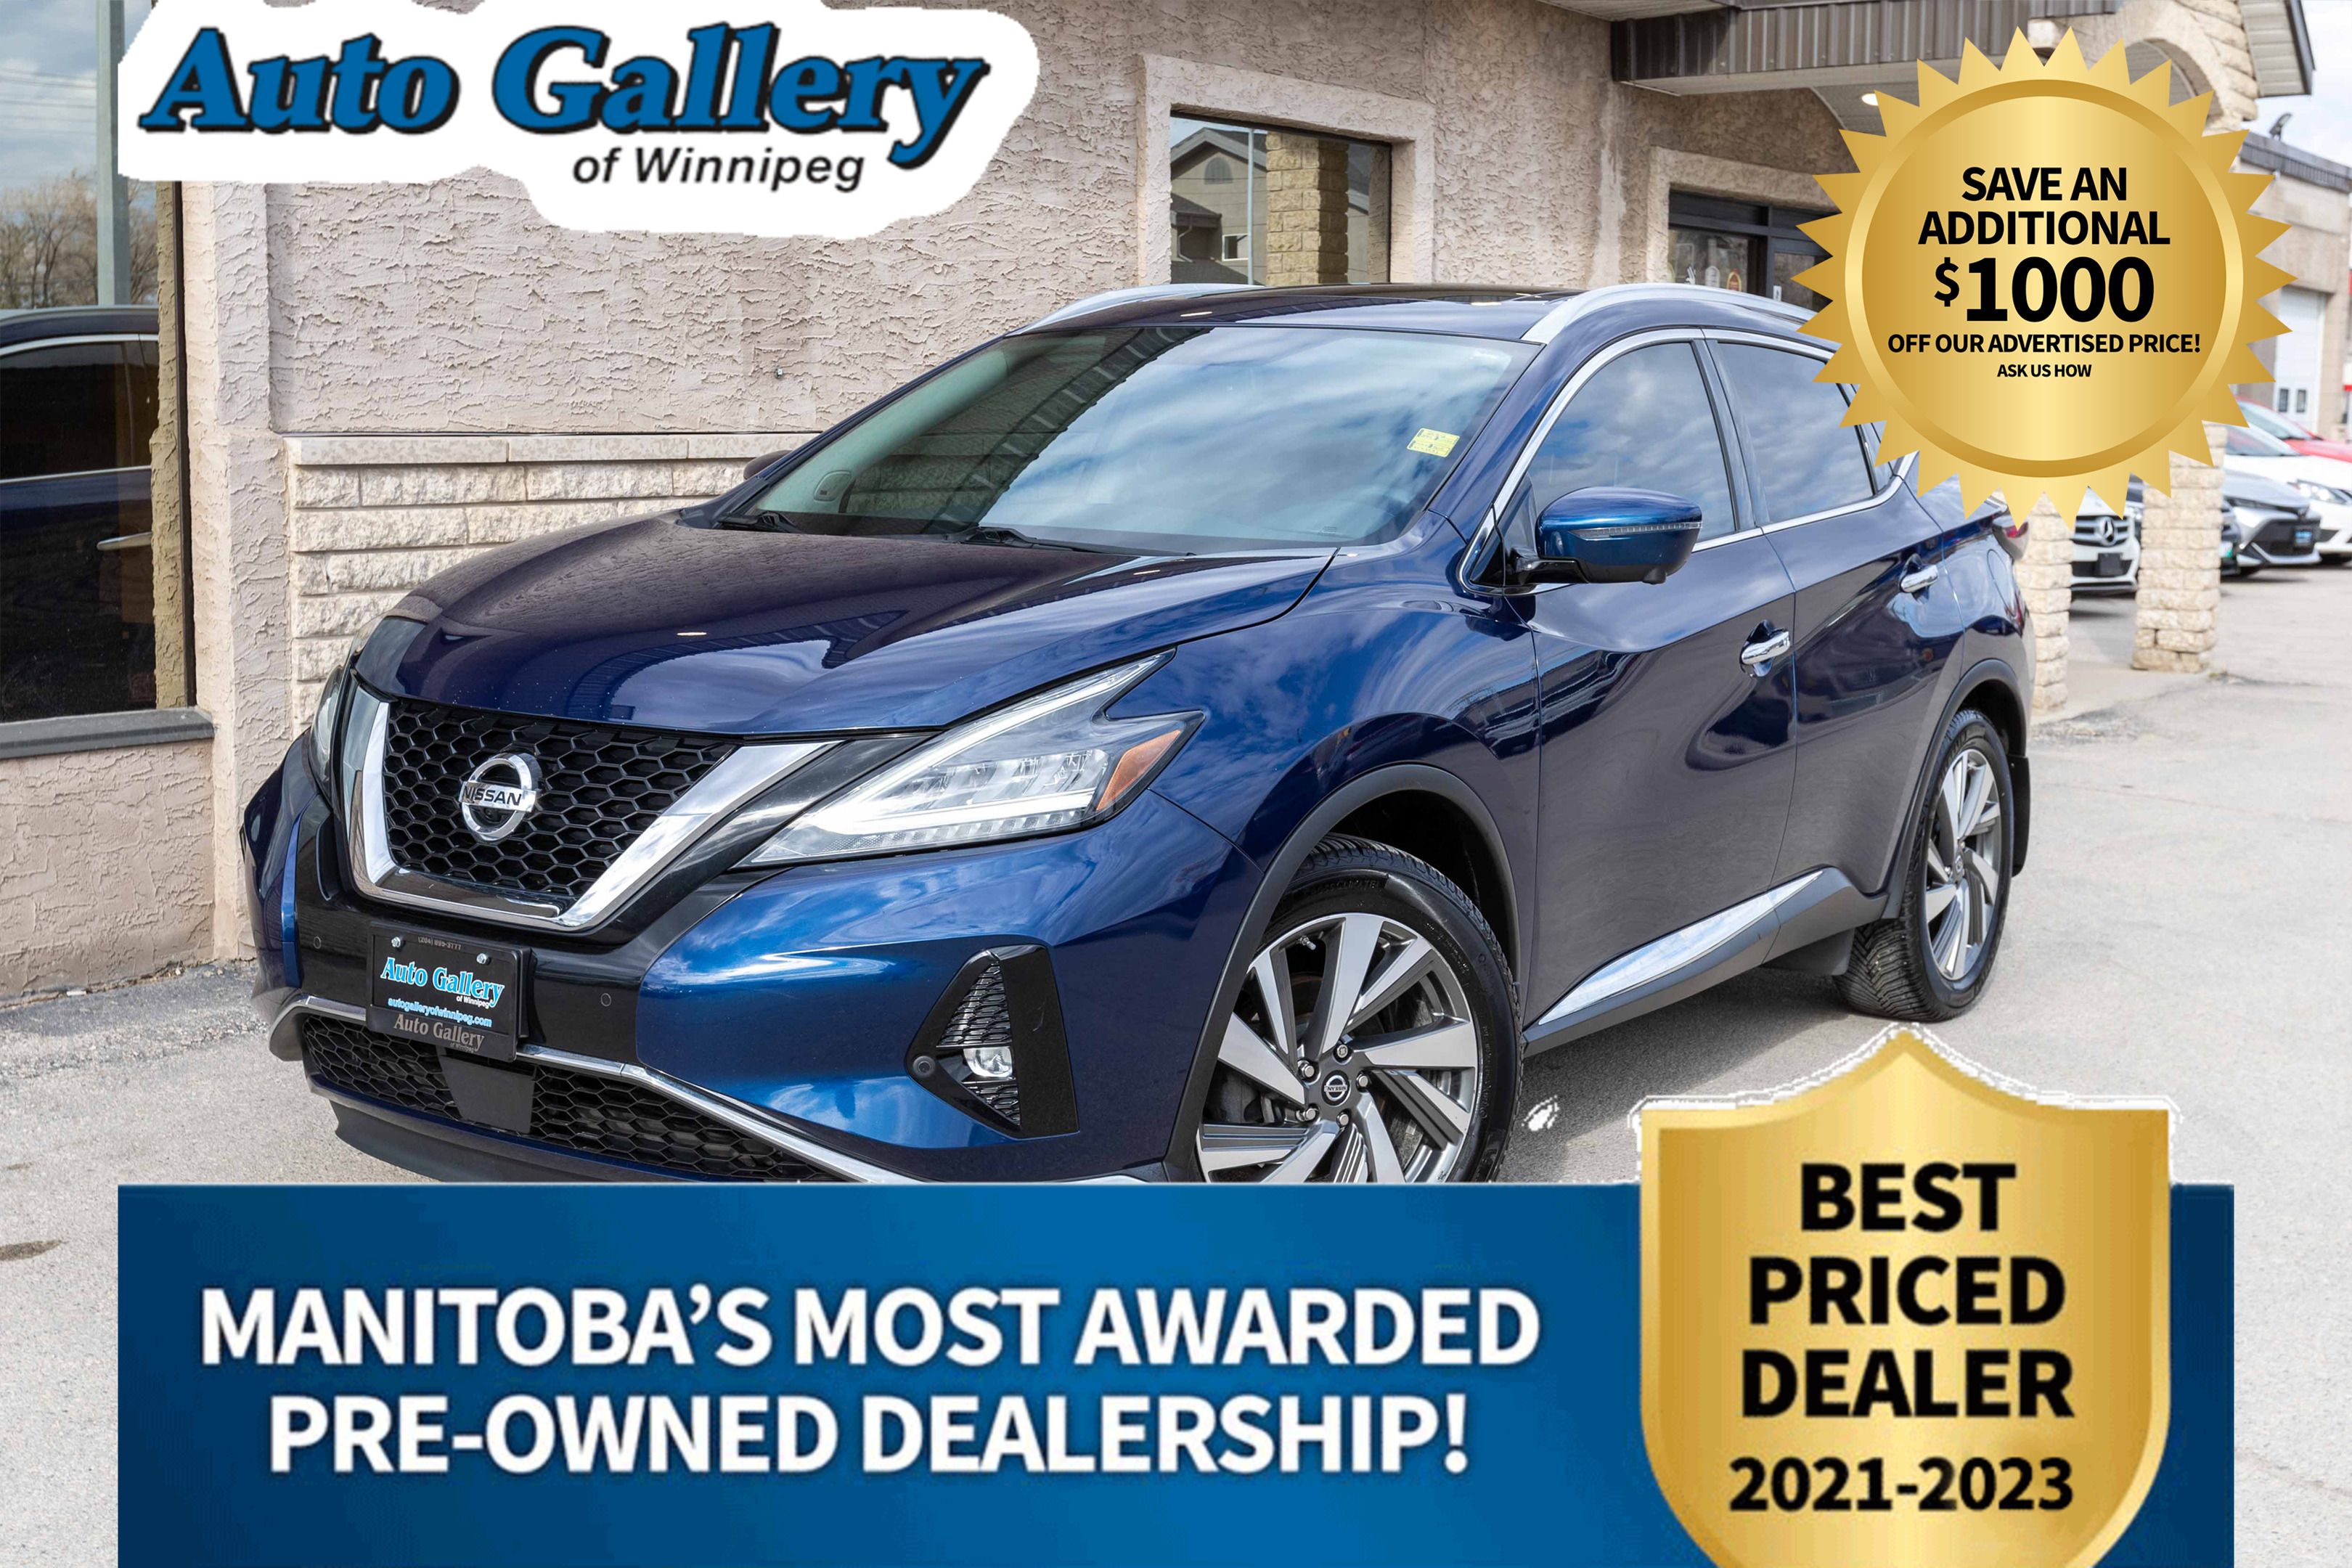 2019 Nissan Murano SL, AWD, BOSE, HTD SEATS, SUNROOF, LEATHER, & MORE